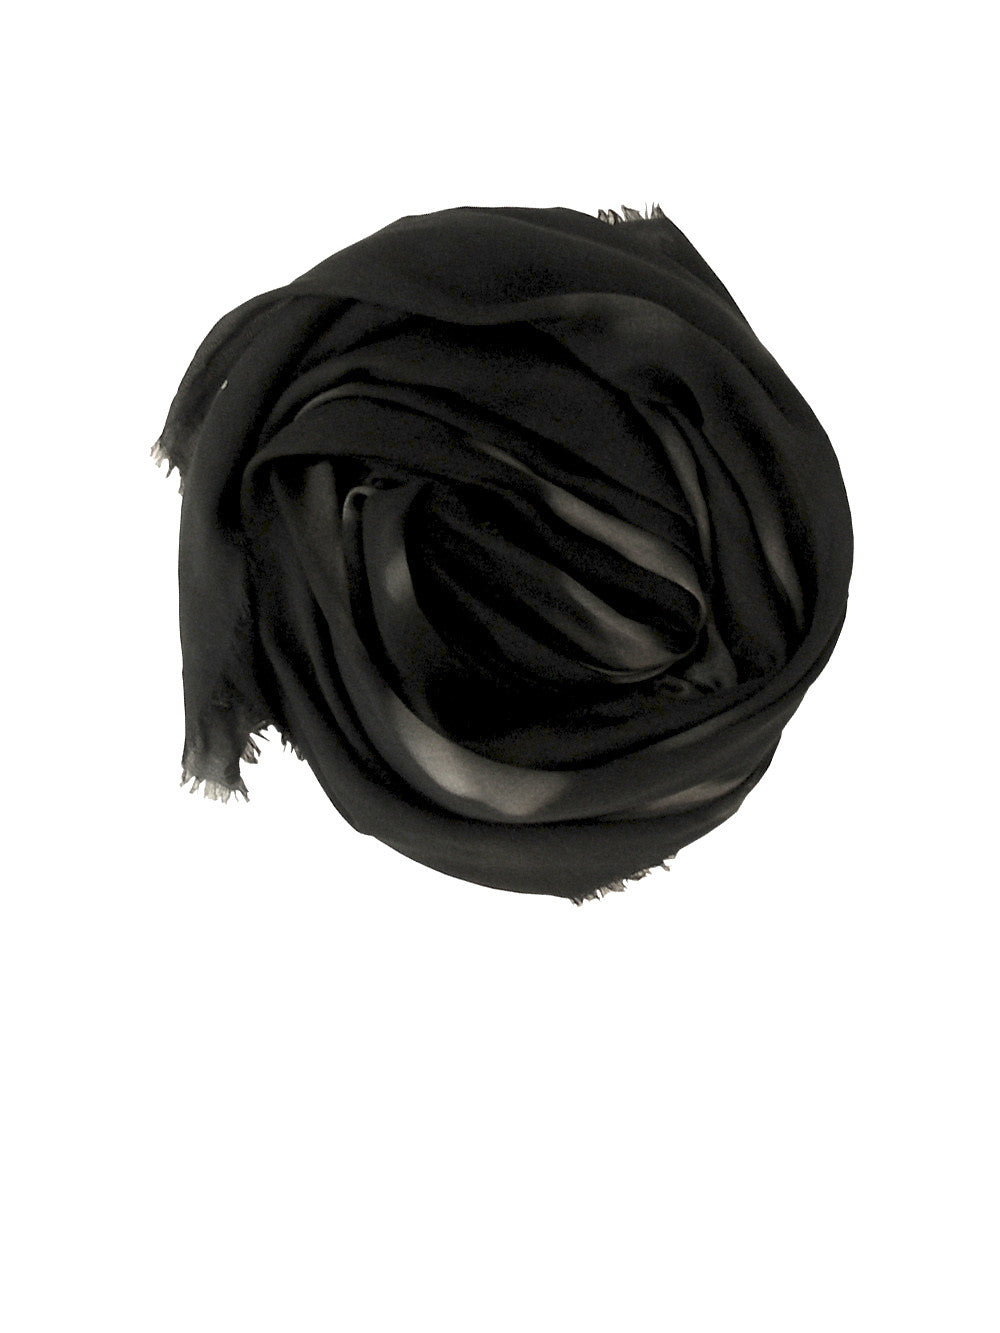 Buy beautiful luxury big black scarves for women & men online, in paris, taipei & tokyo. Great scarf styles as perfect gift. Good as salon champagne !